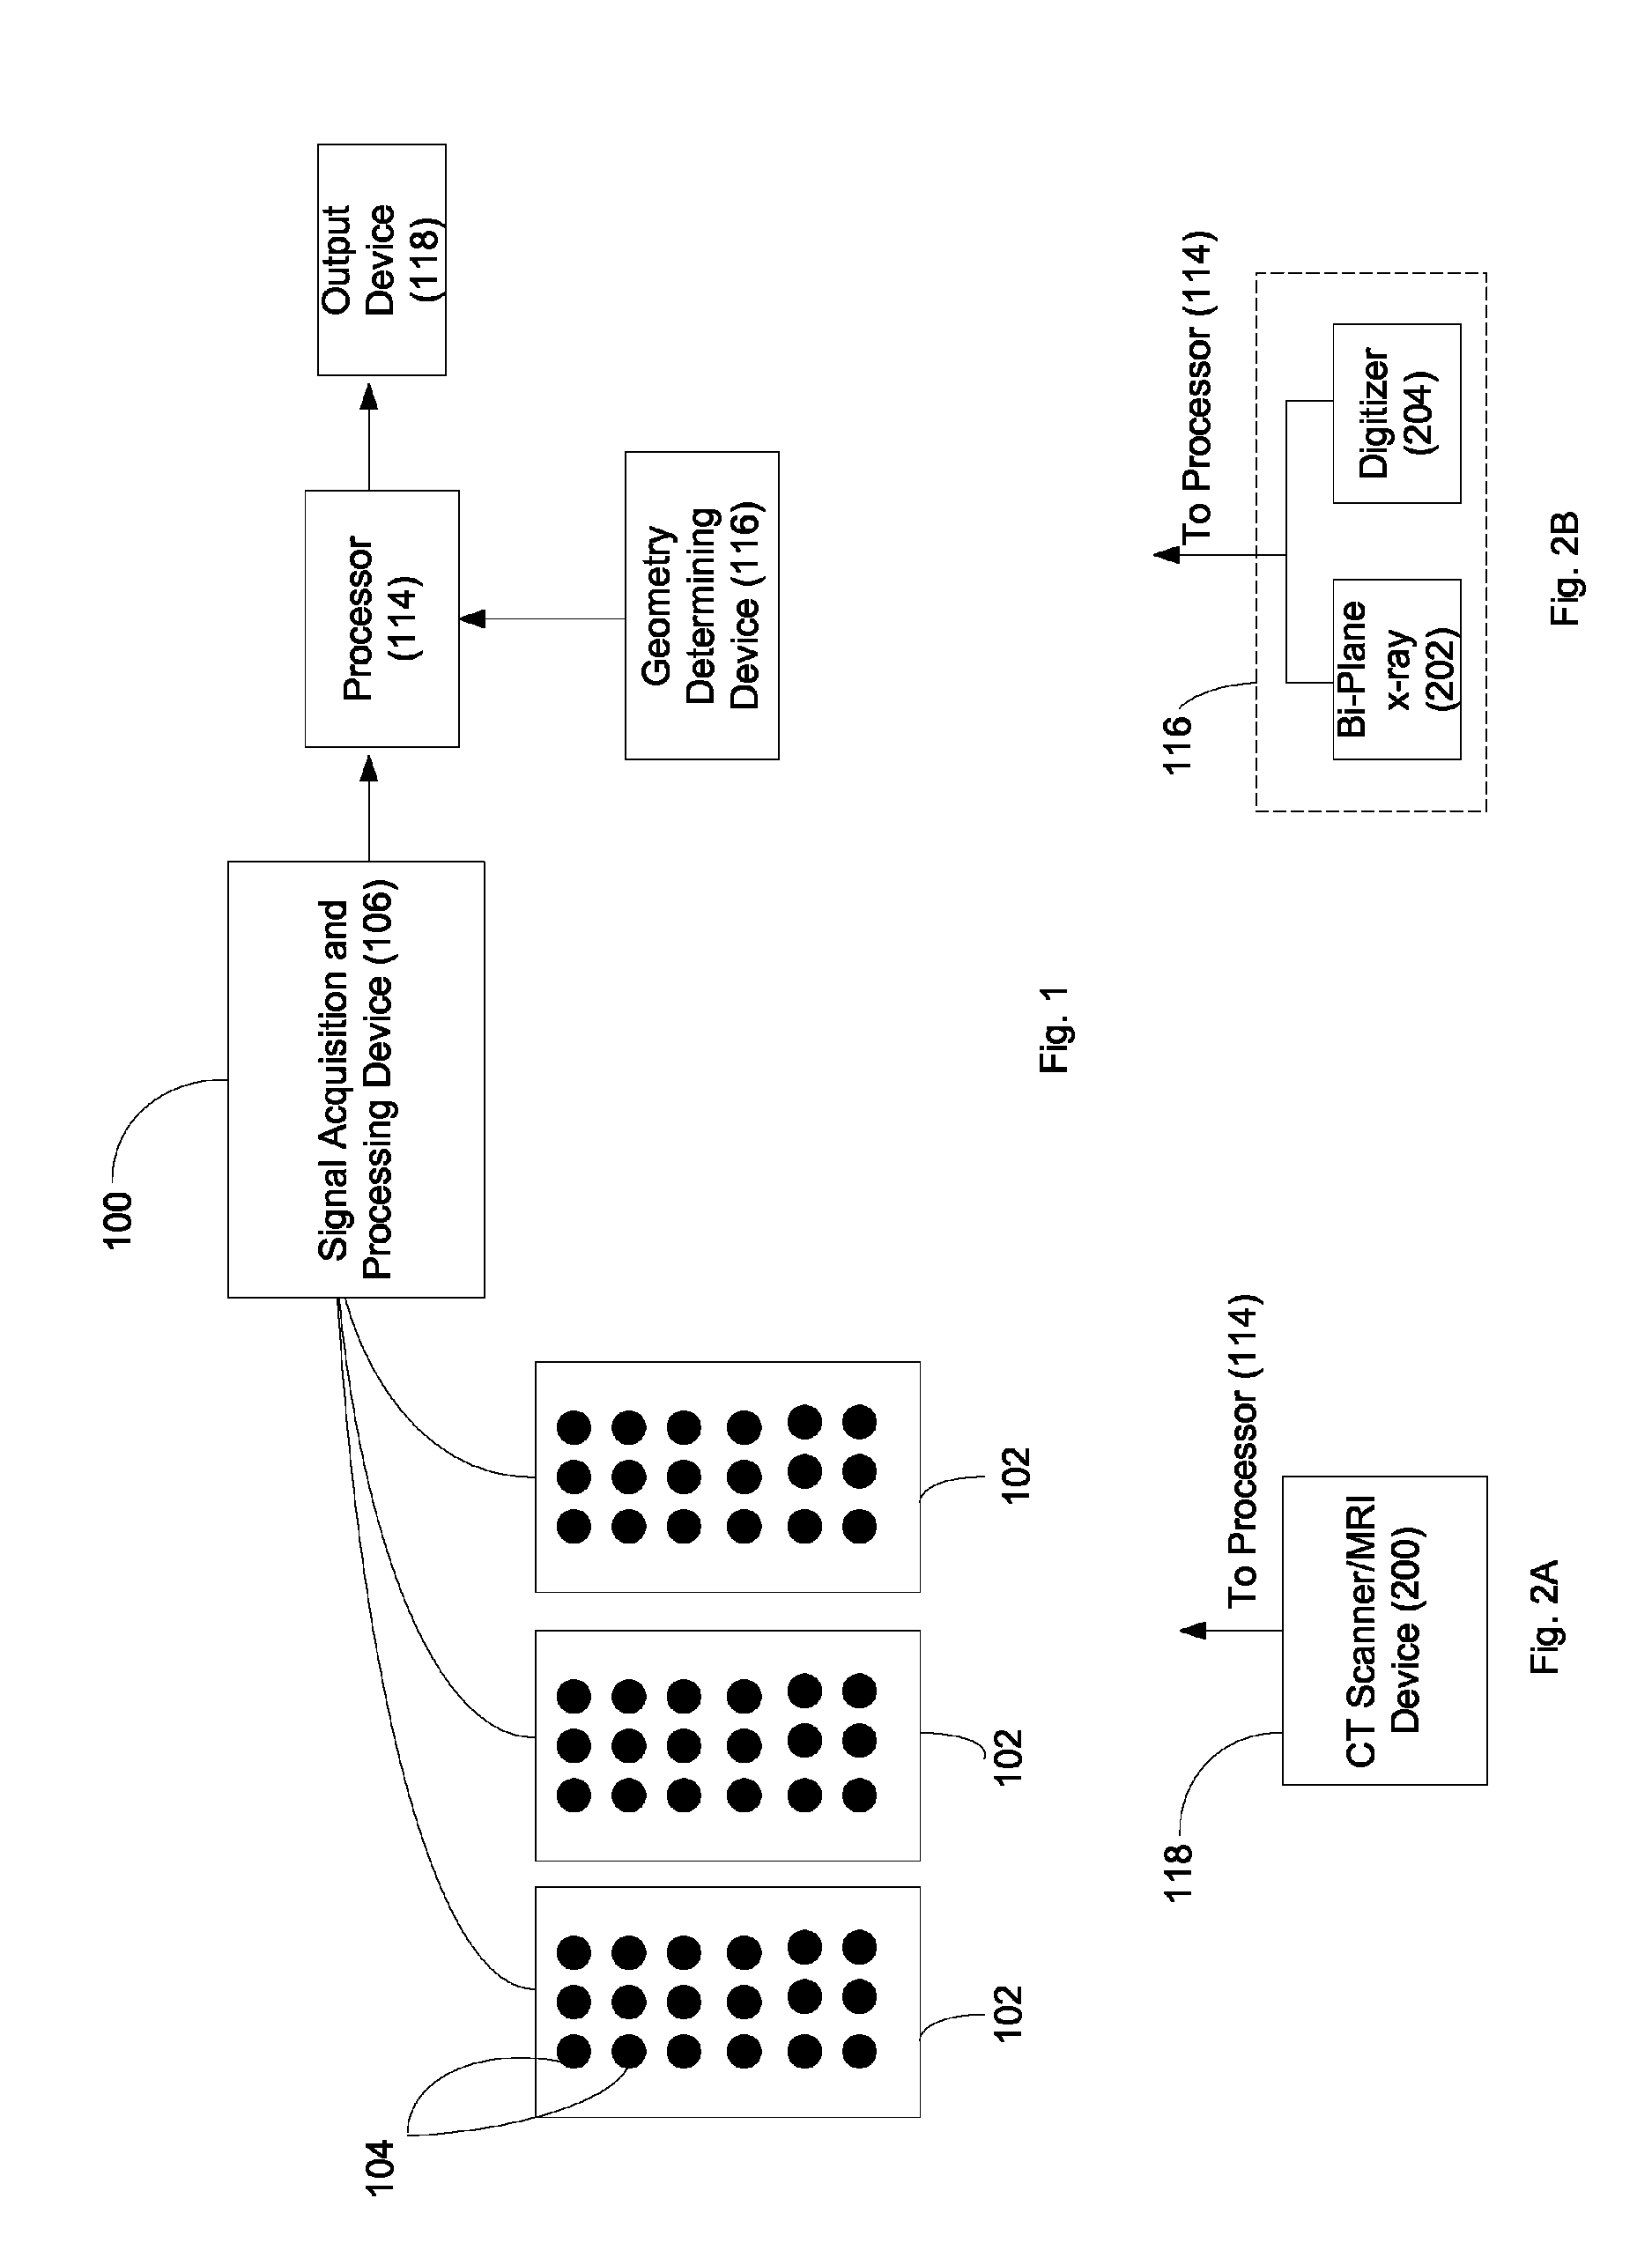 System and method for noninvasive electrocardiographic imaging (ECGI)